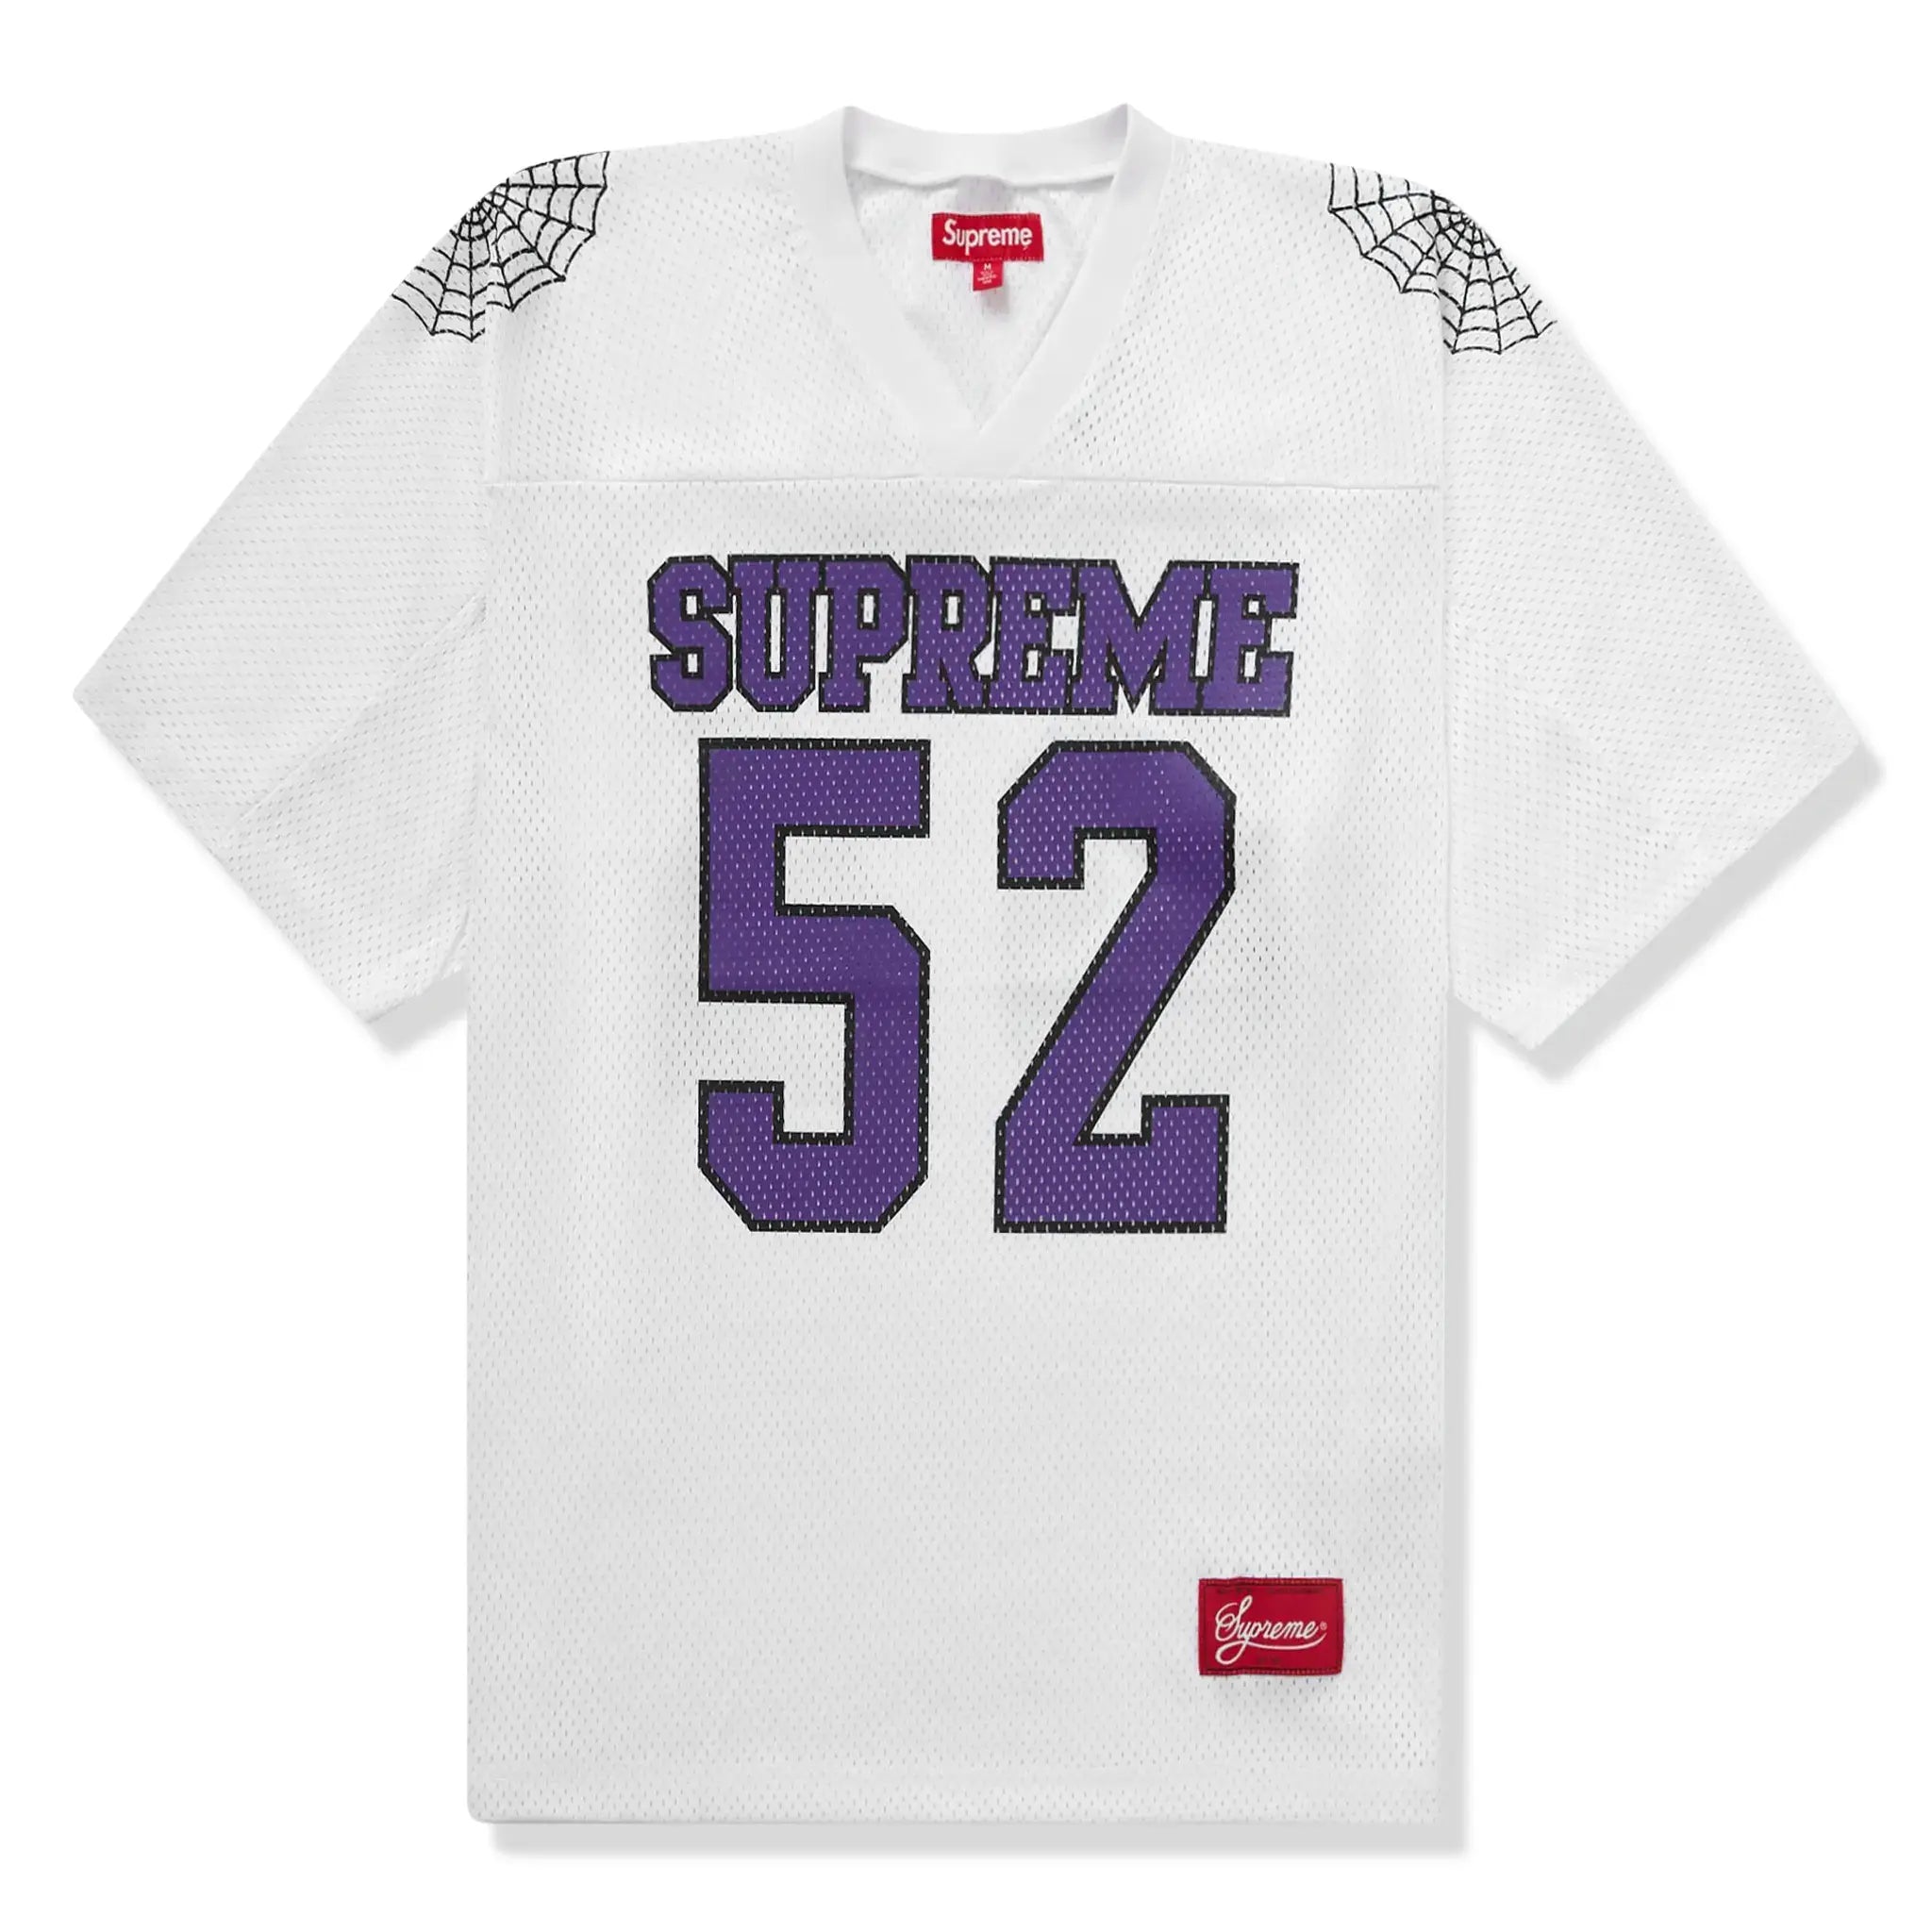 Front view of Supreme Spiderweb White Football Jersey